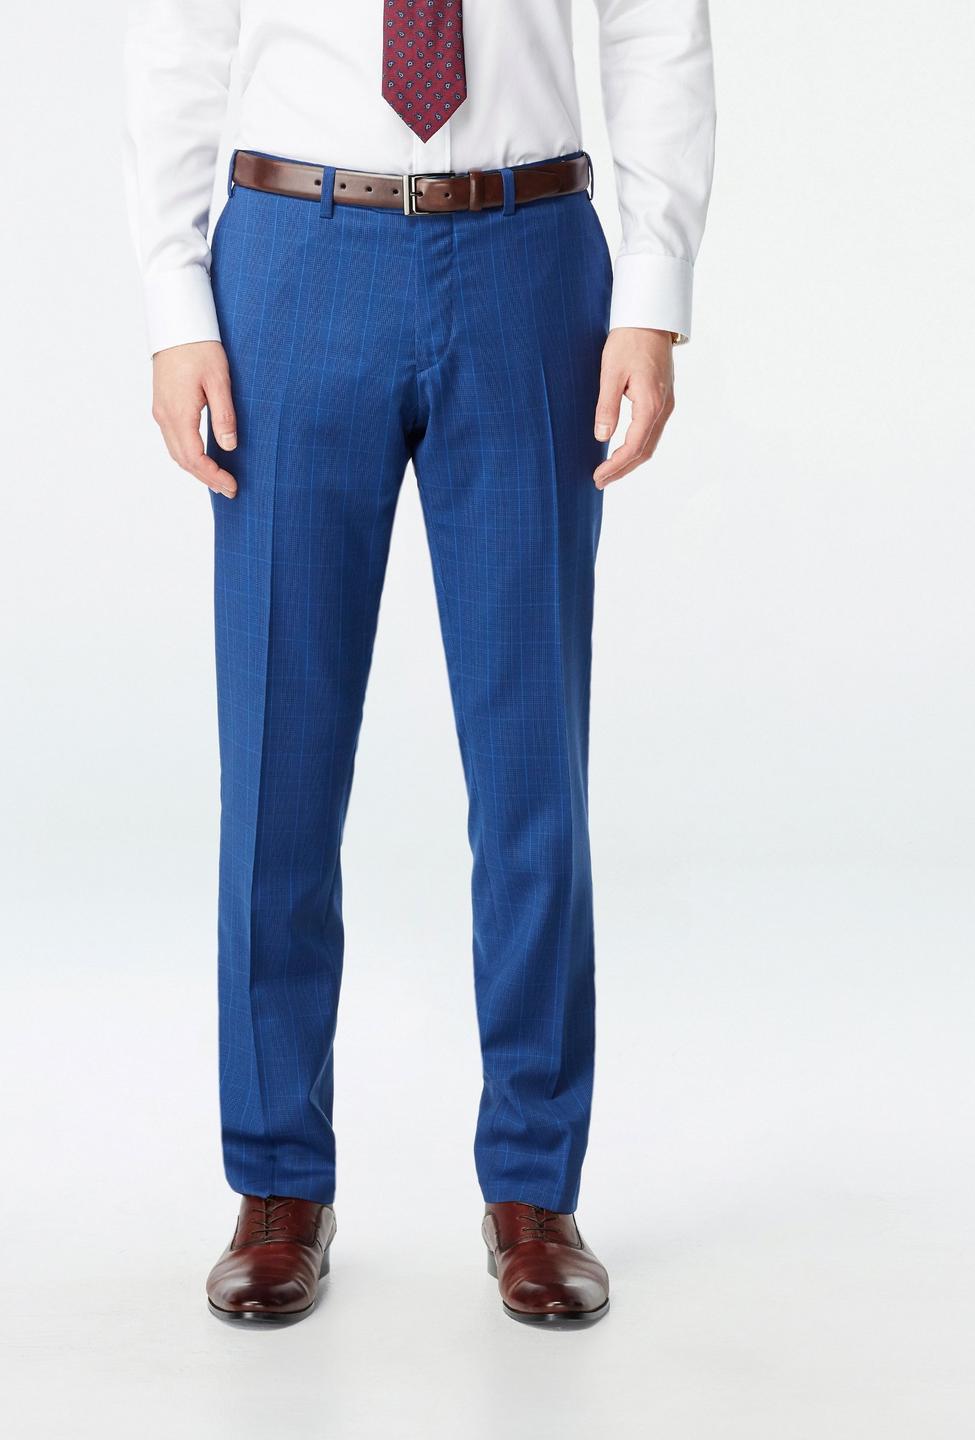 Blue pants - Hemsworth Plaid Design from Premium Indochino Collection